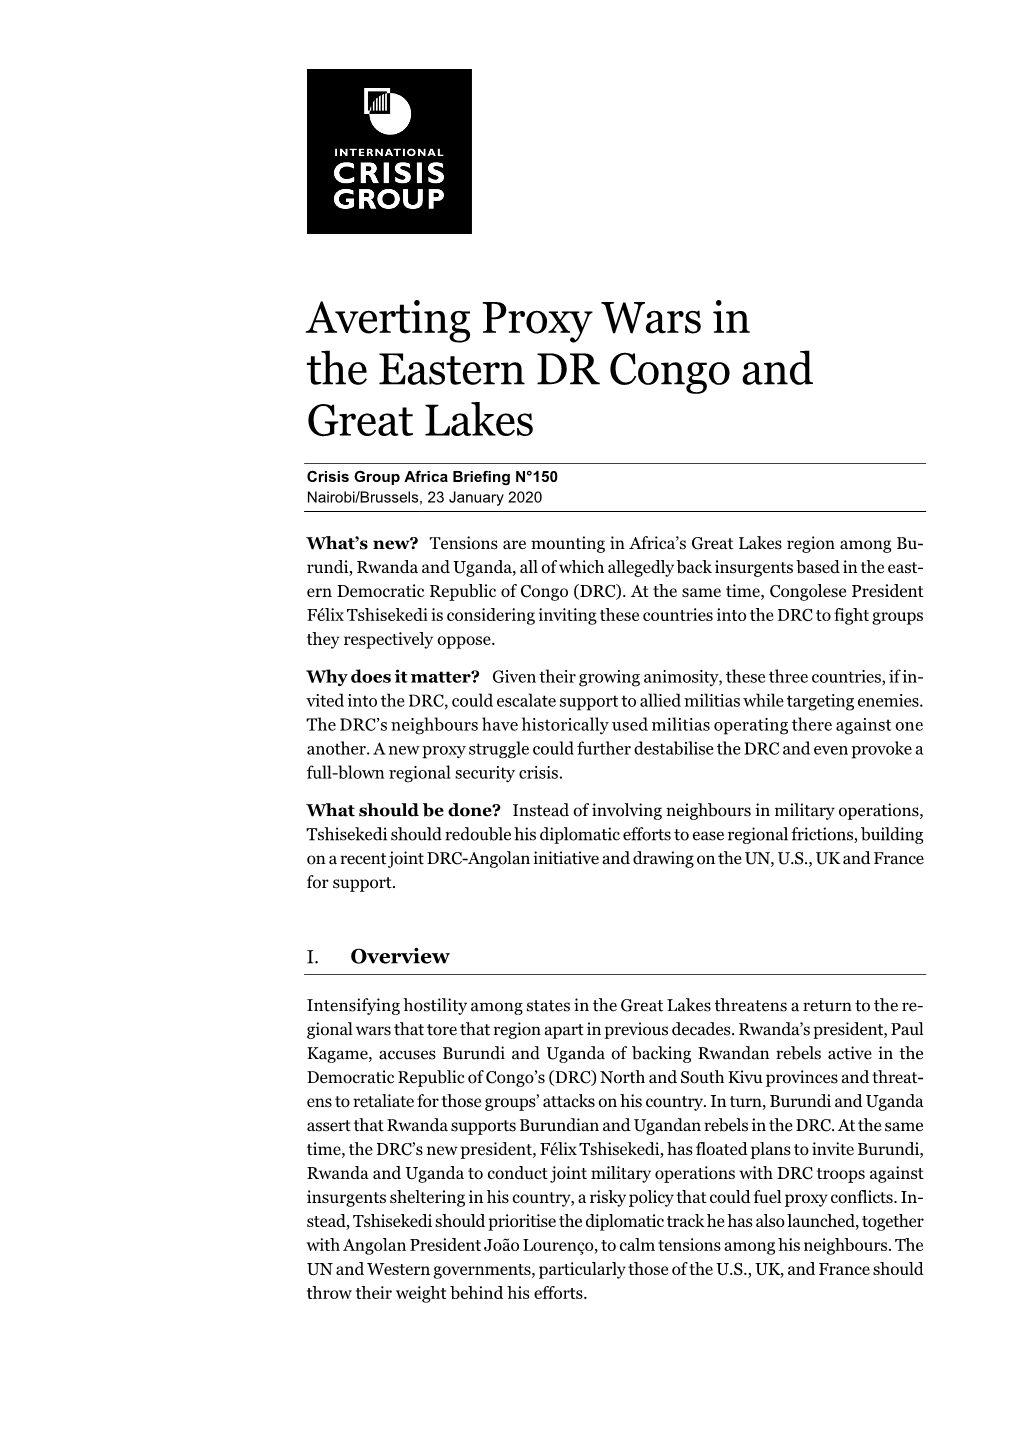 Averting Proxy Wars in the Eastern DR Congo and Great Lakes